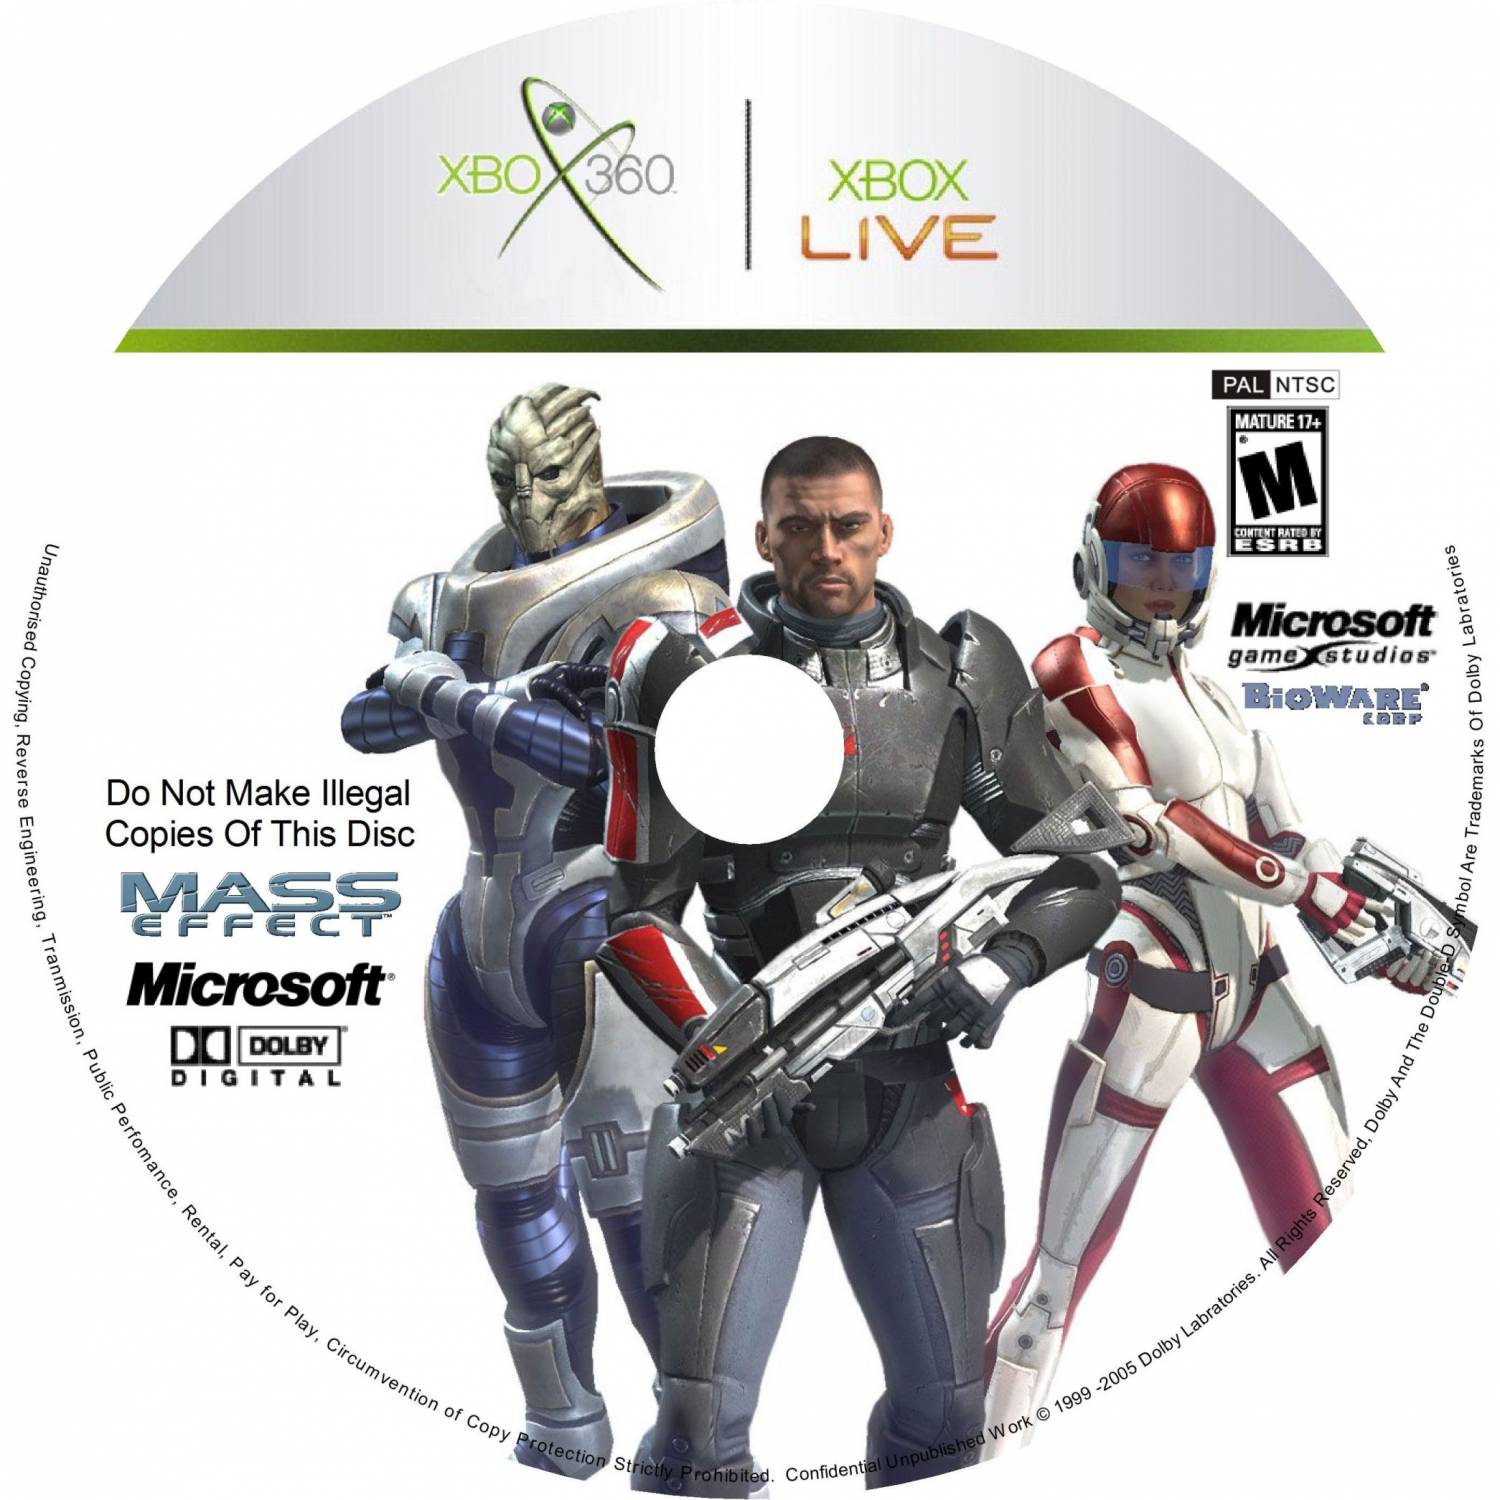 Xbox effects. Mass Effect Xbox 360. Mass Effect (Xbox 360) lt+3.0. Mass Effect Xbox 360 Unboxing.